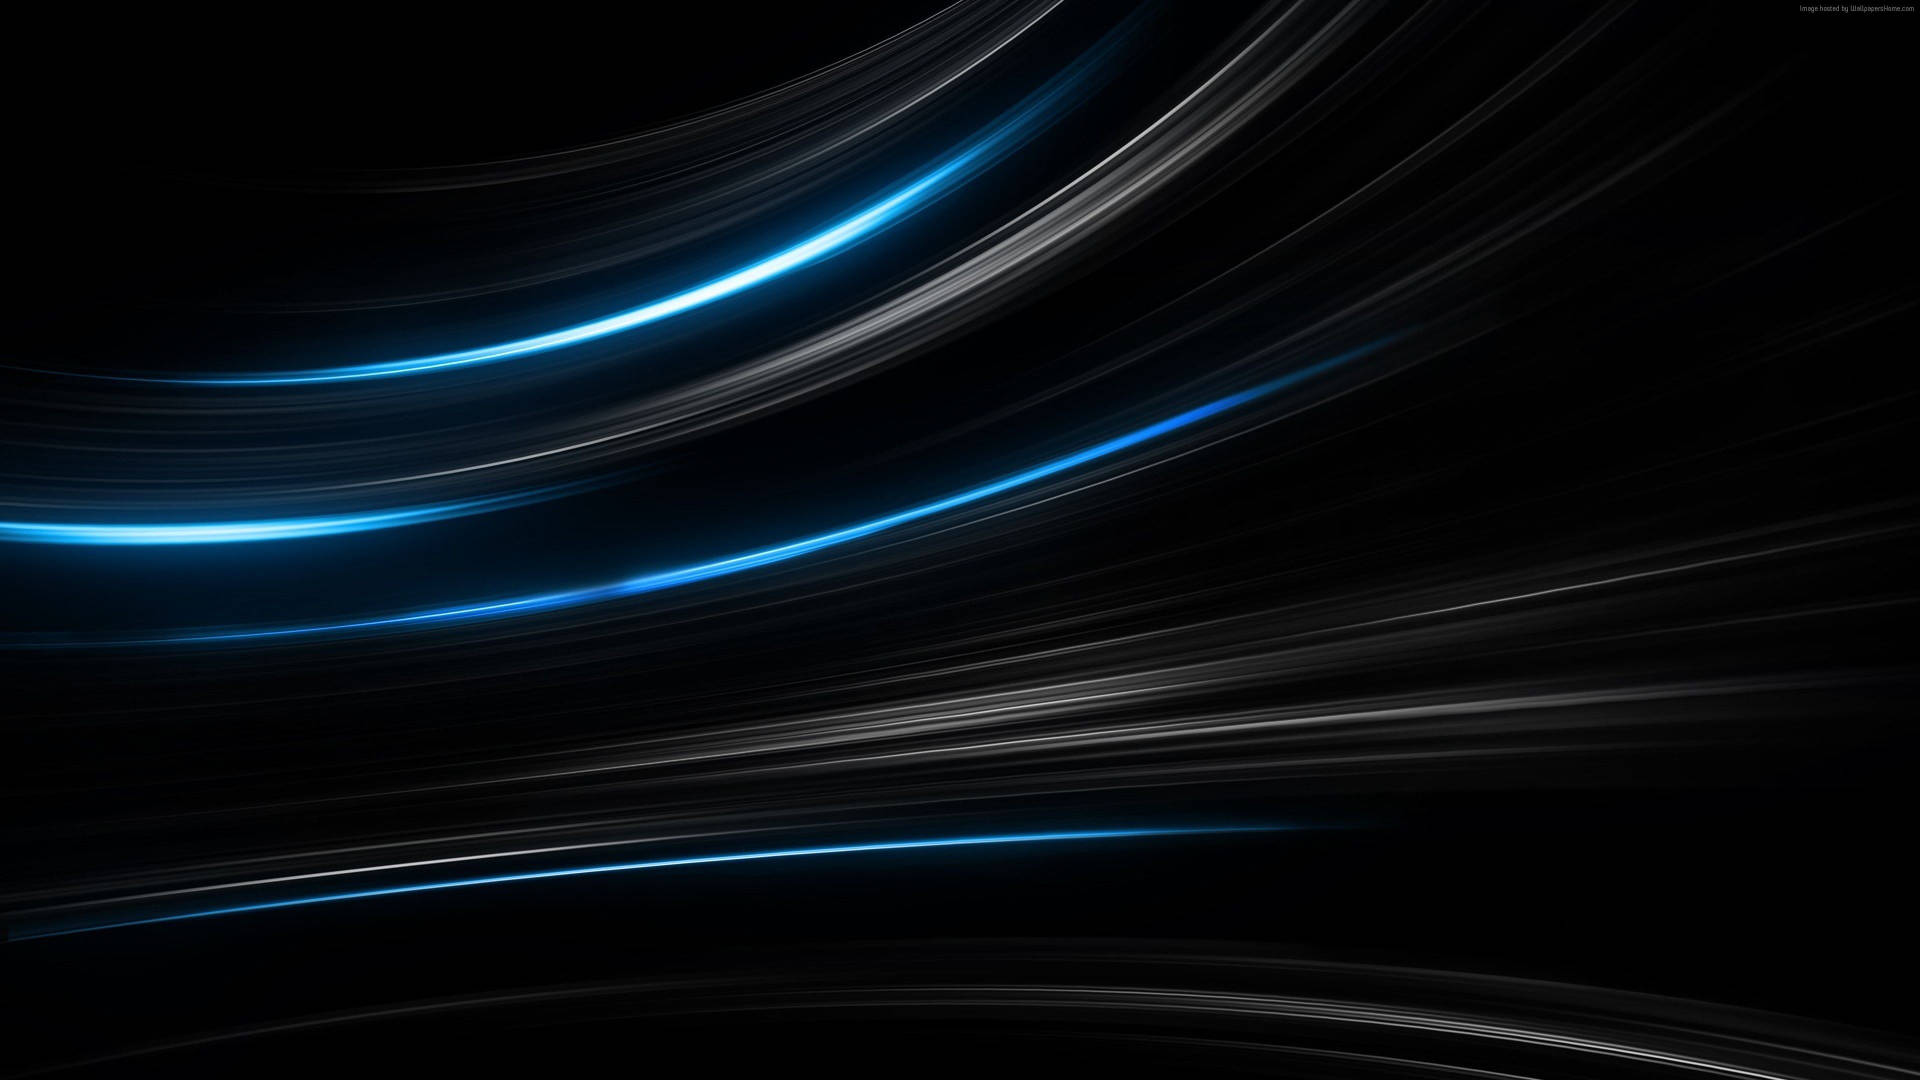 Black And Blue Curved Lines Background